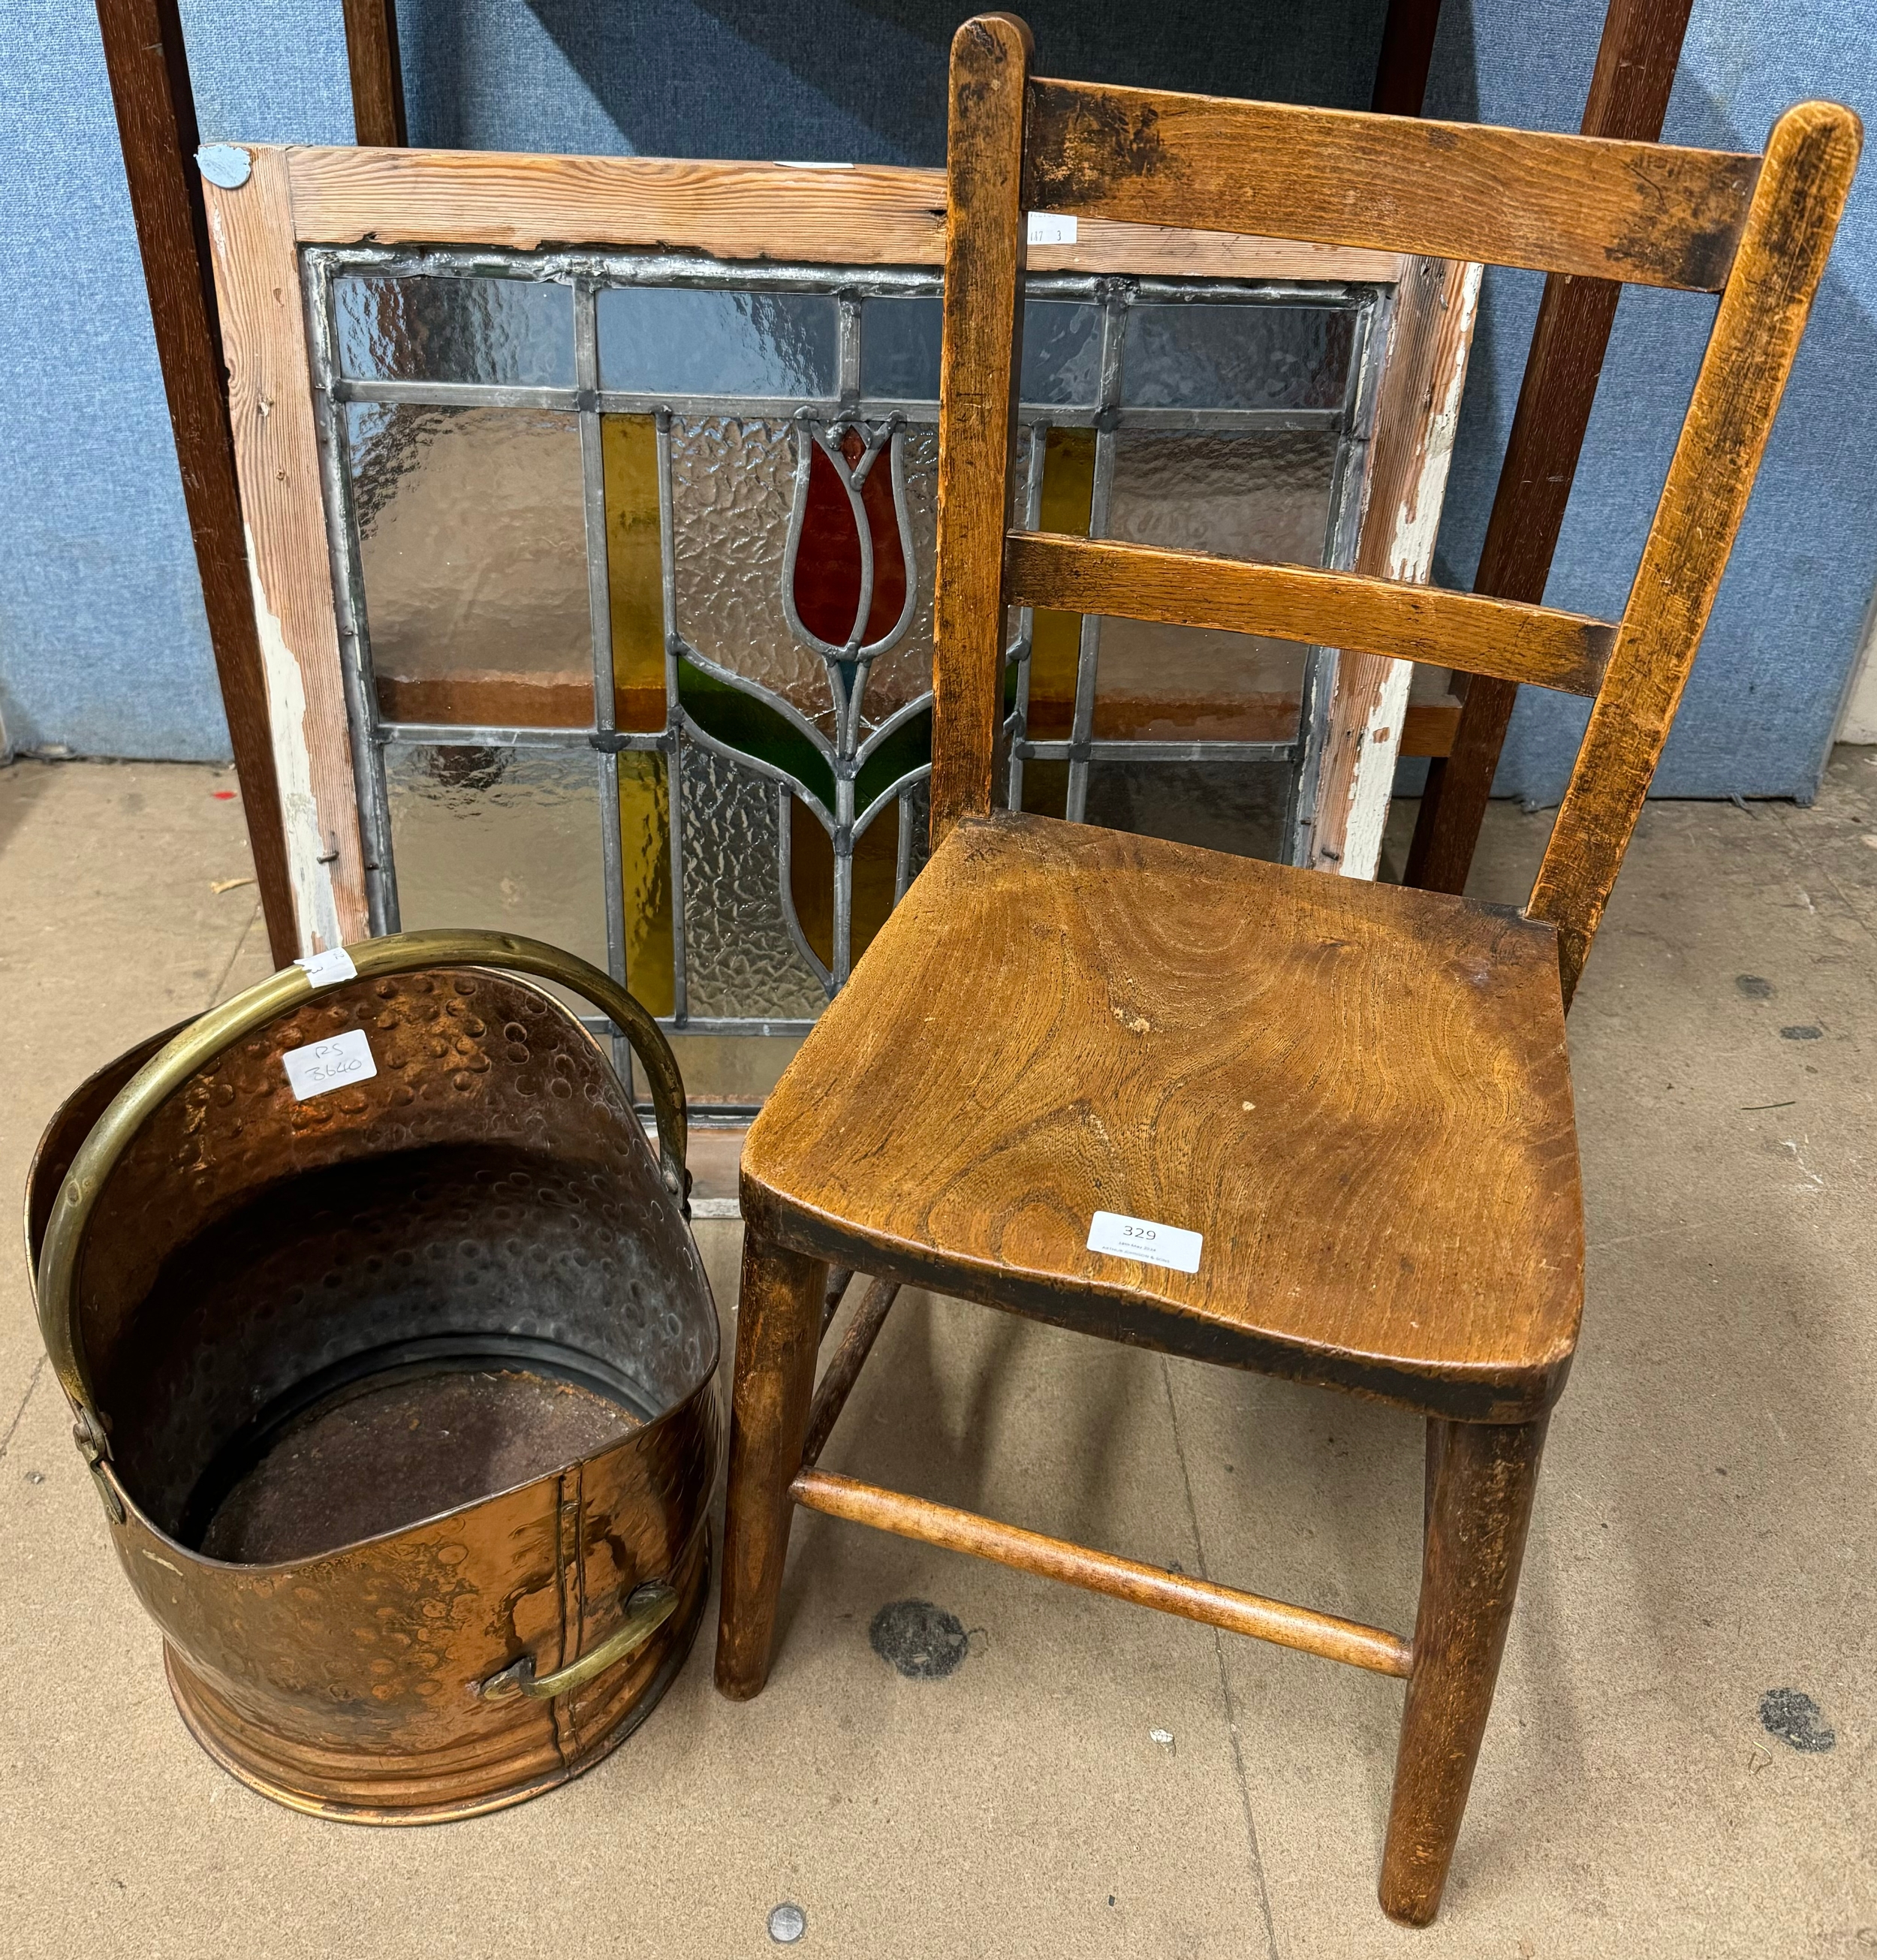 A copper coal scuttle, a child's chair and a stained glass window